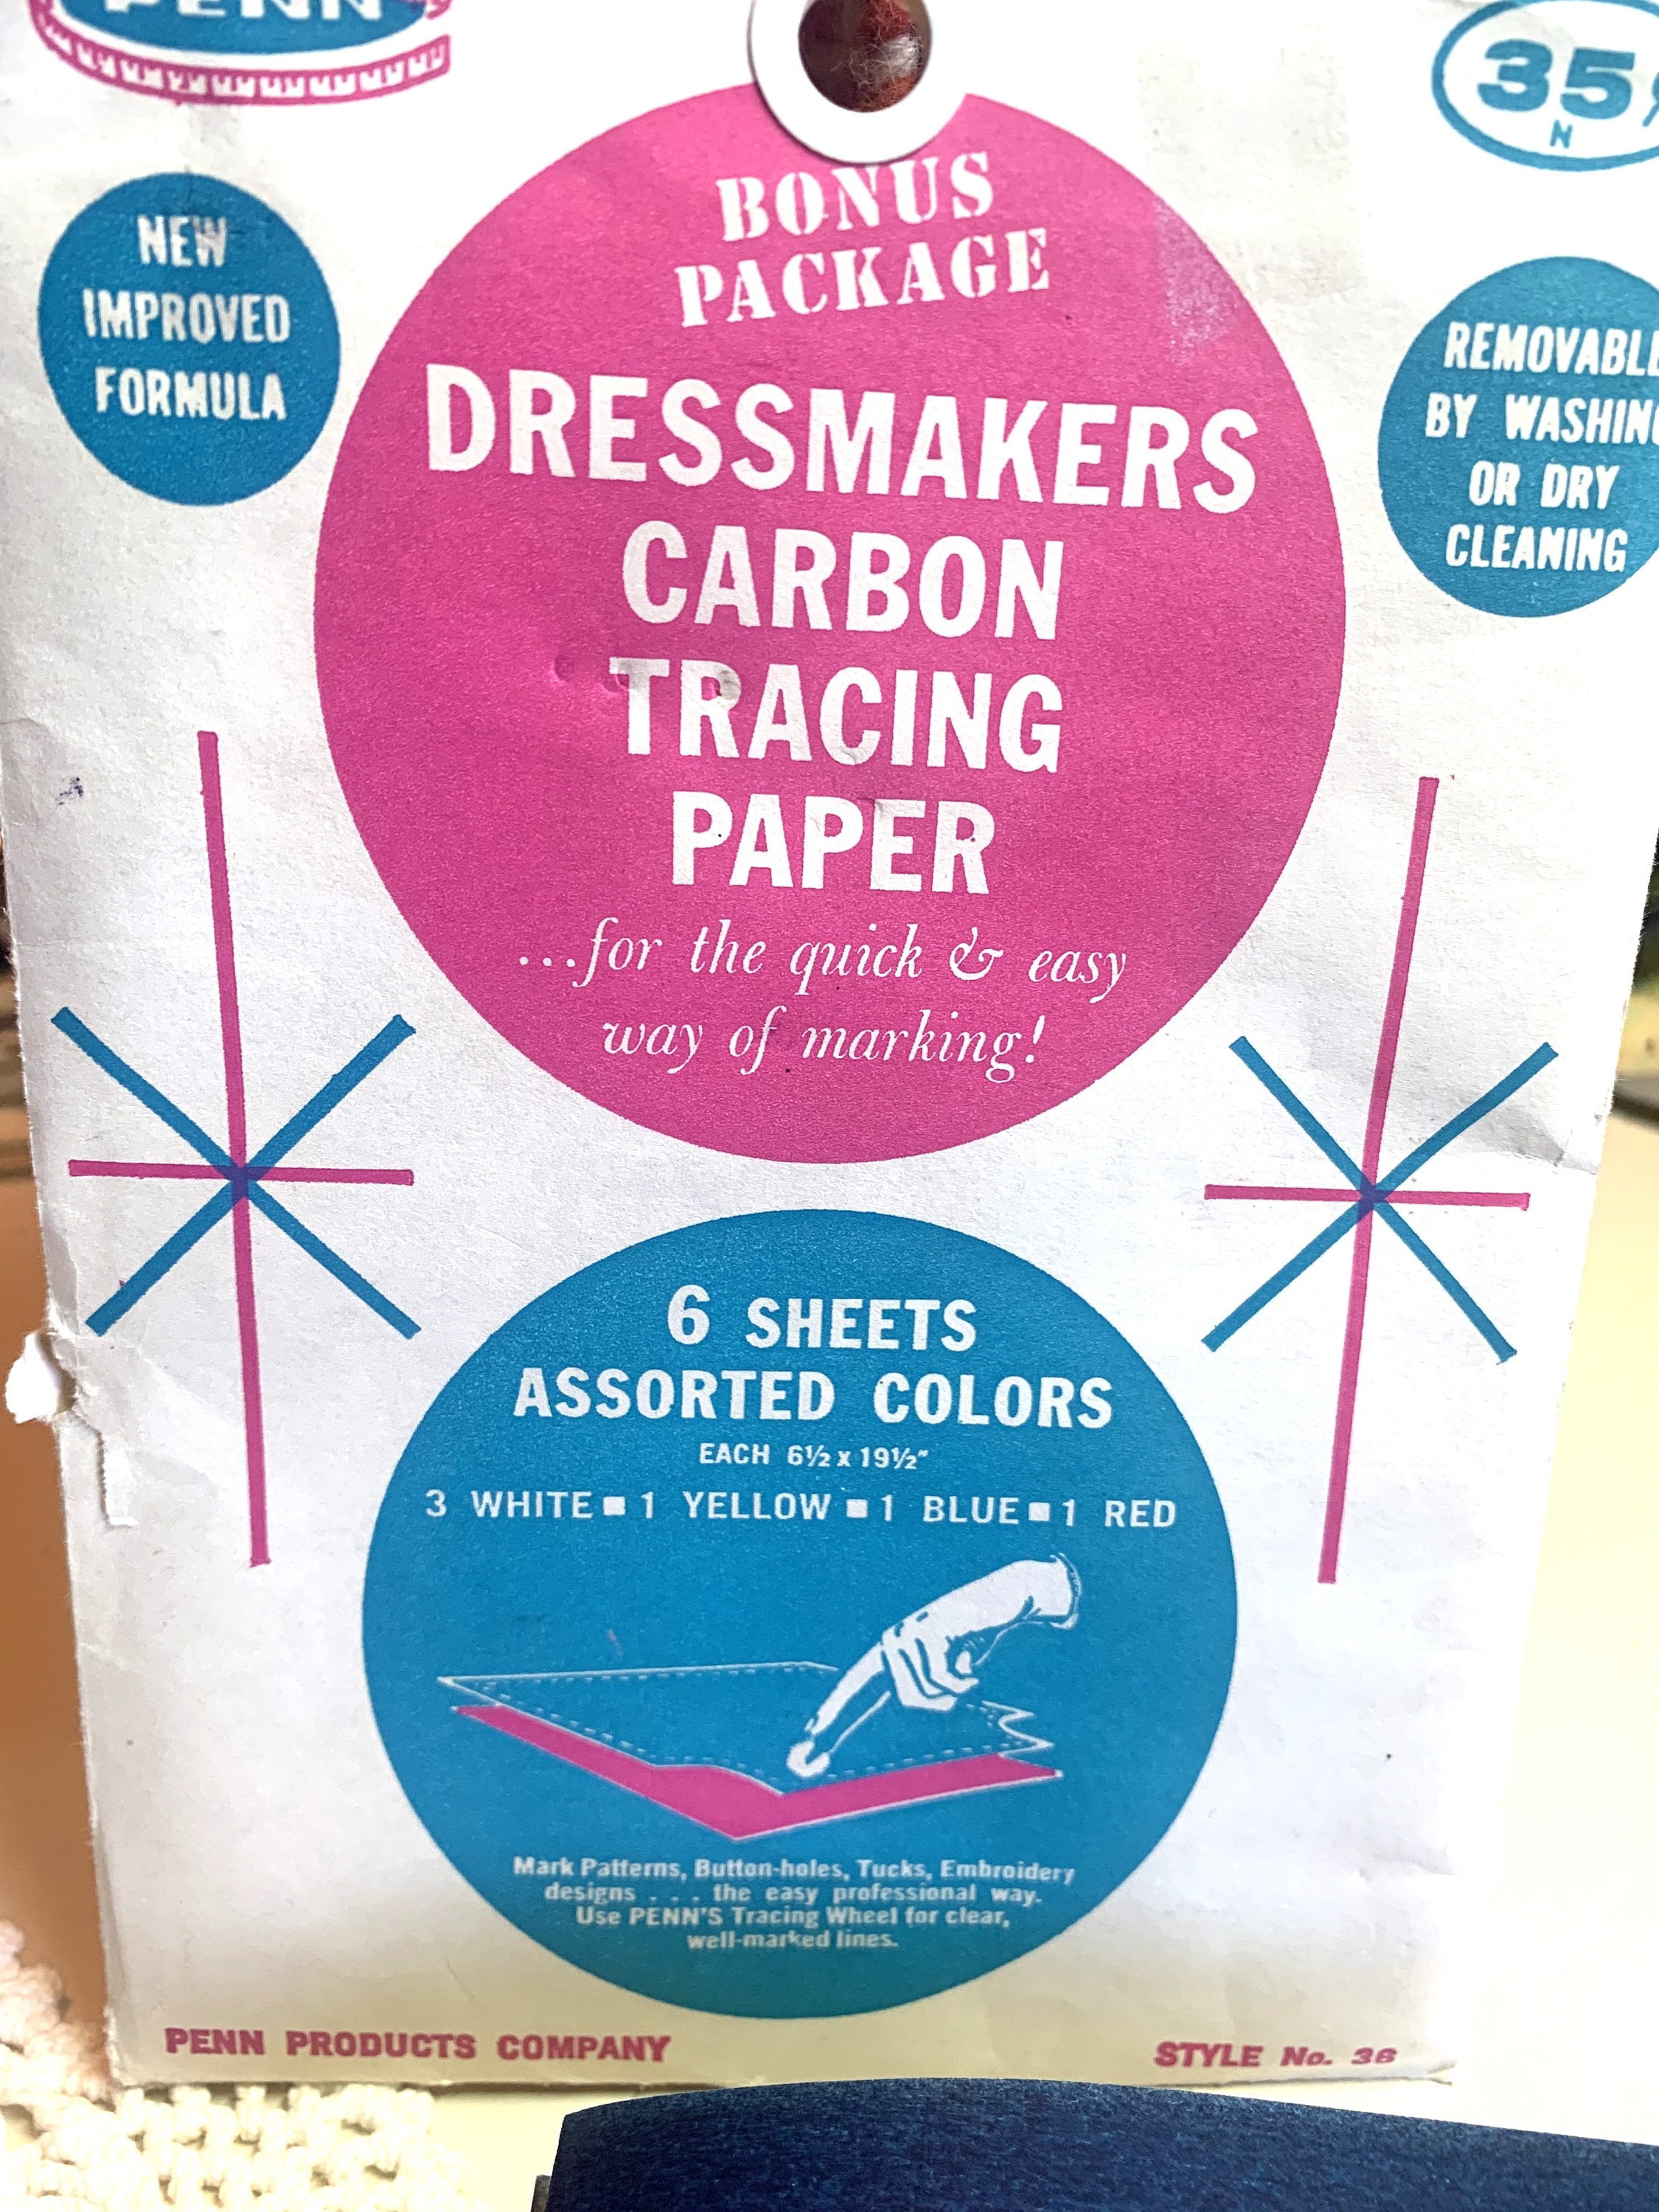 Carbon Transfer Tracing Paper for Woodworking Patterns (5 Sheets - 26 x 42 per Sheet)